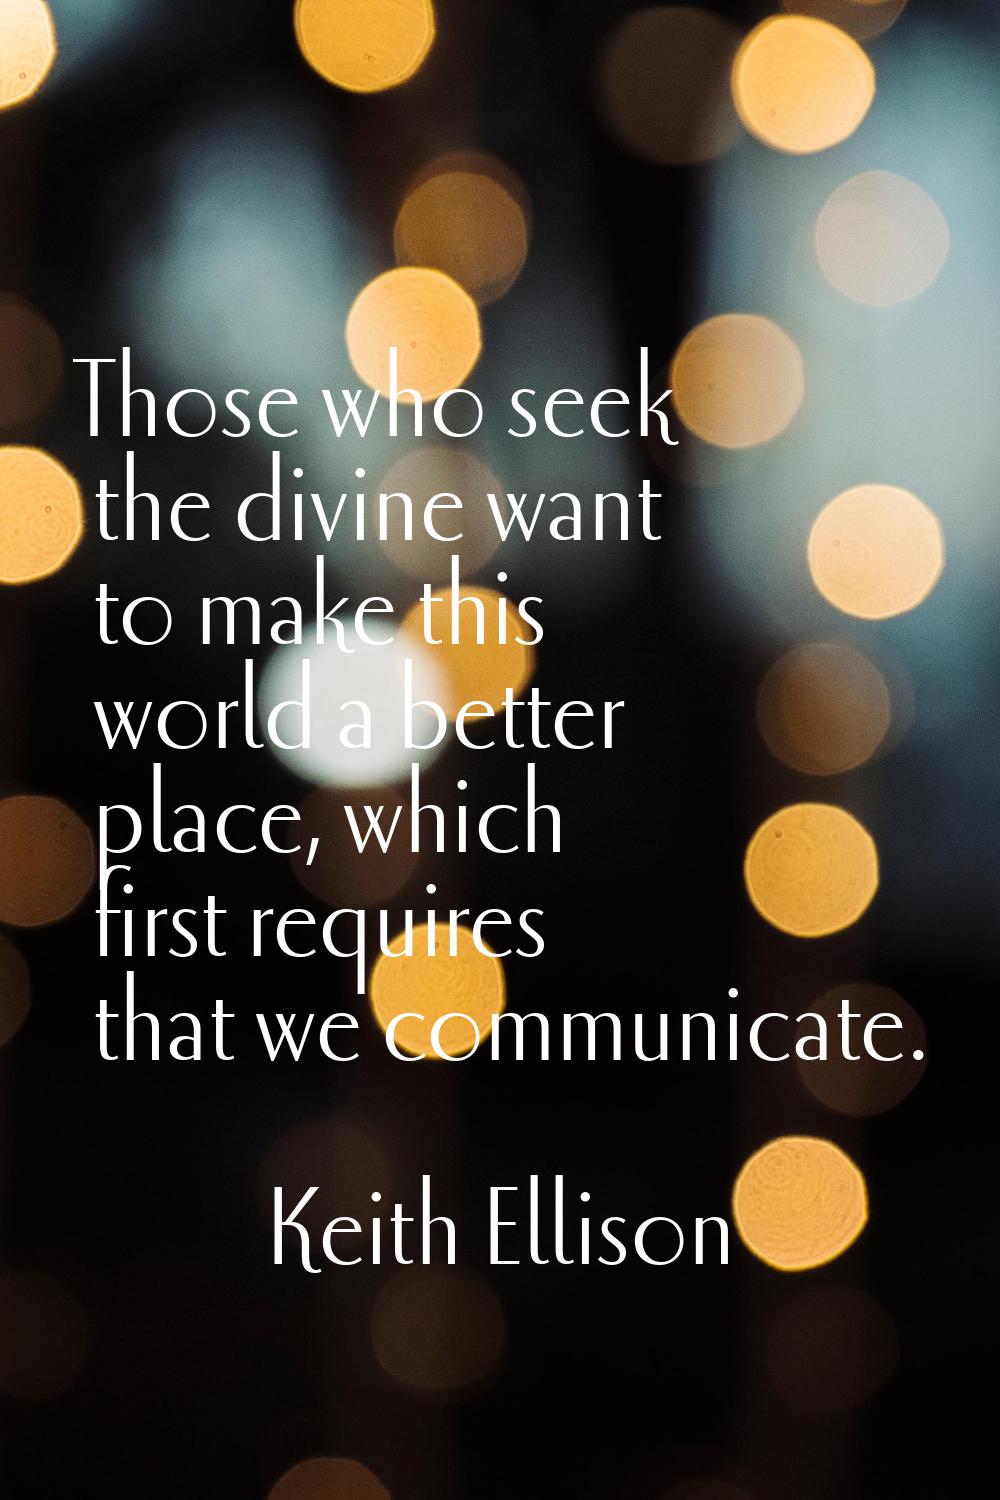 Those who seek the divine want to make this world a better place, which first requires that we comm